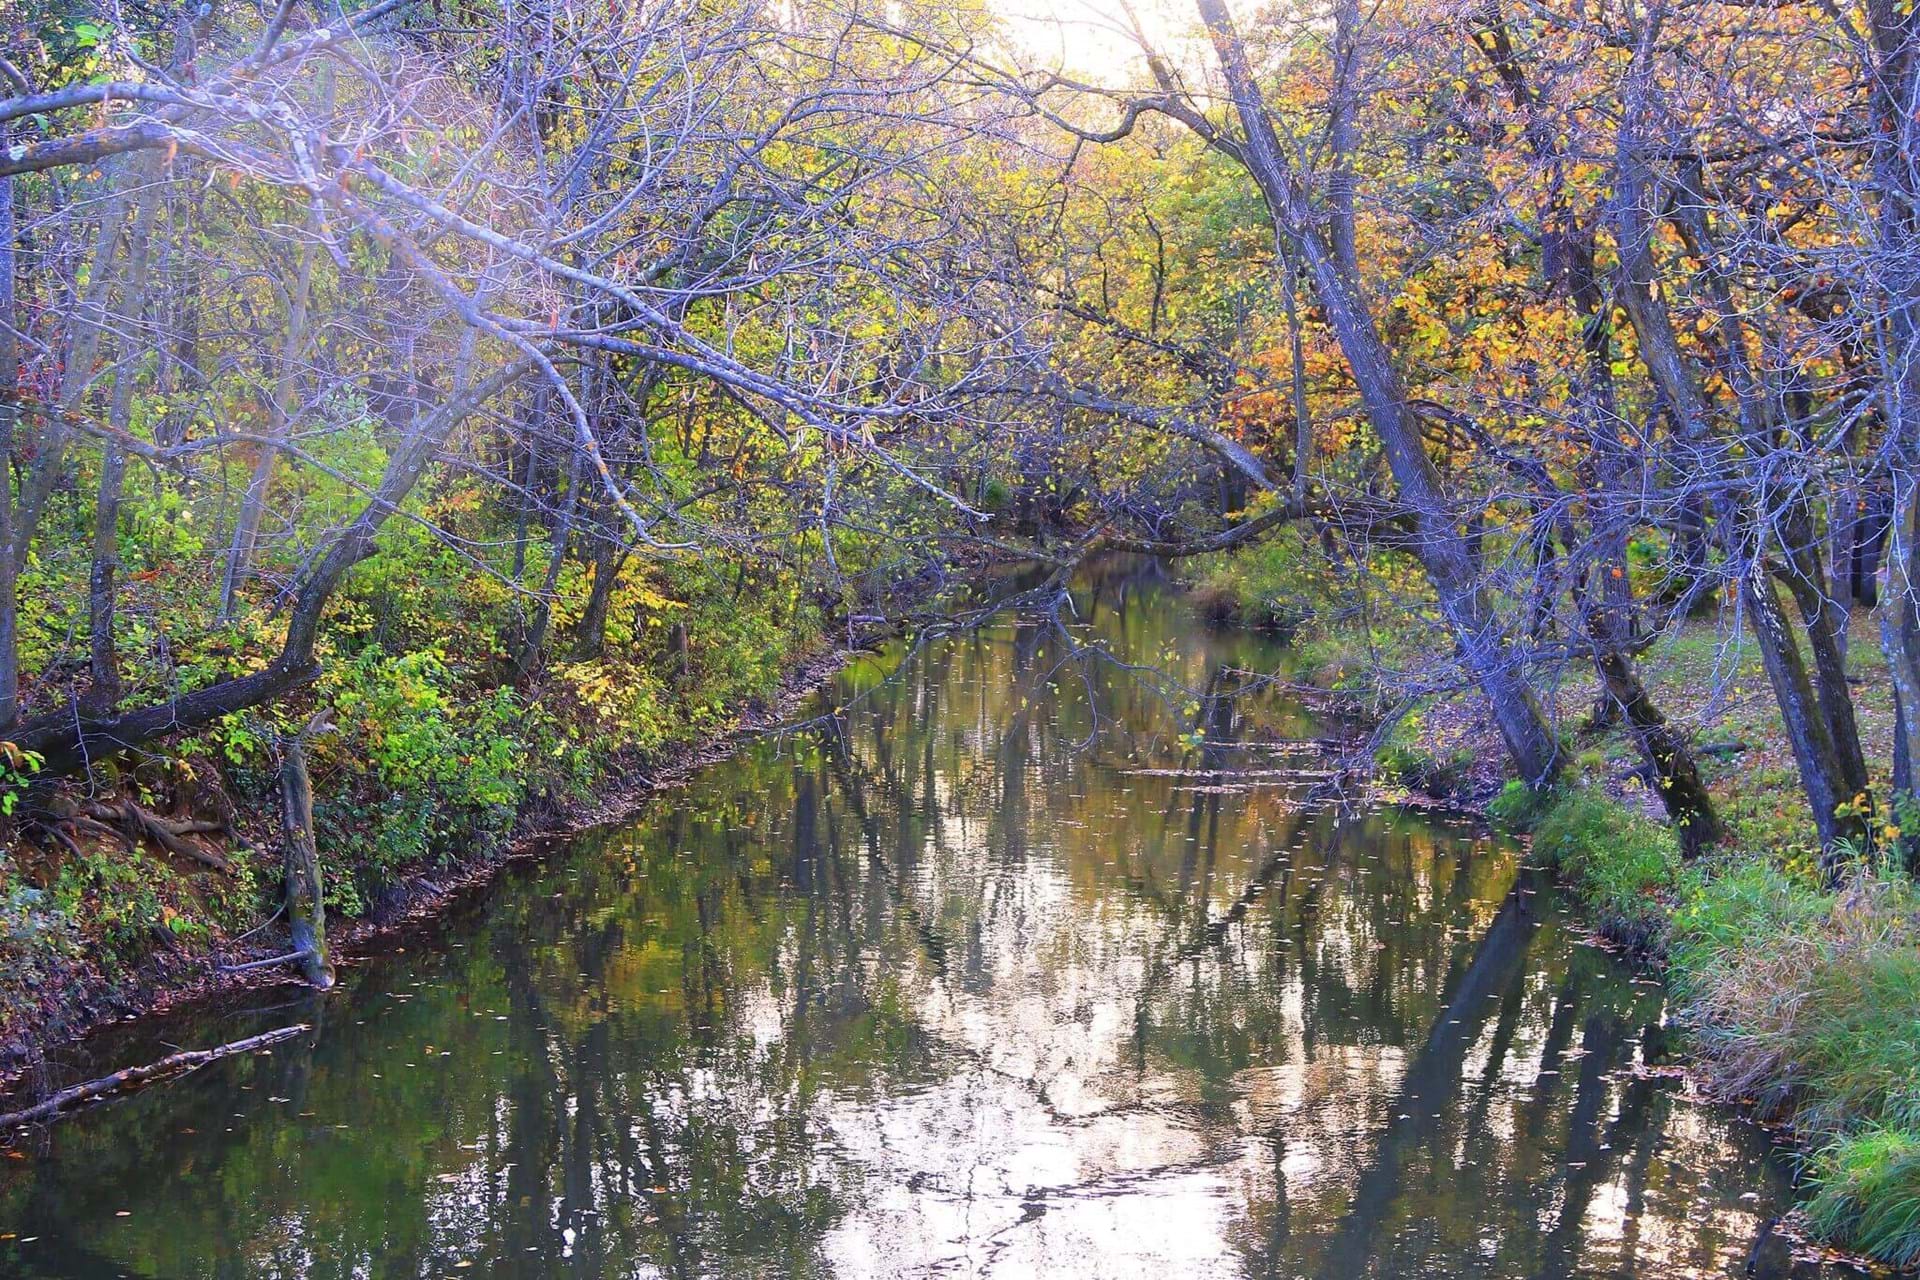 A view of the creek at Ludwig park